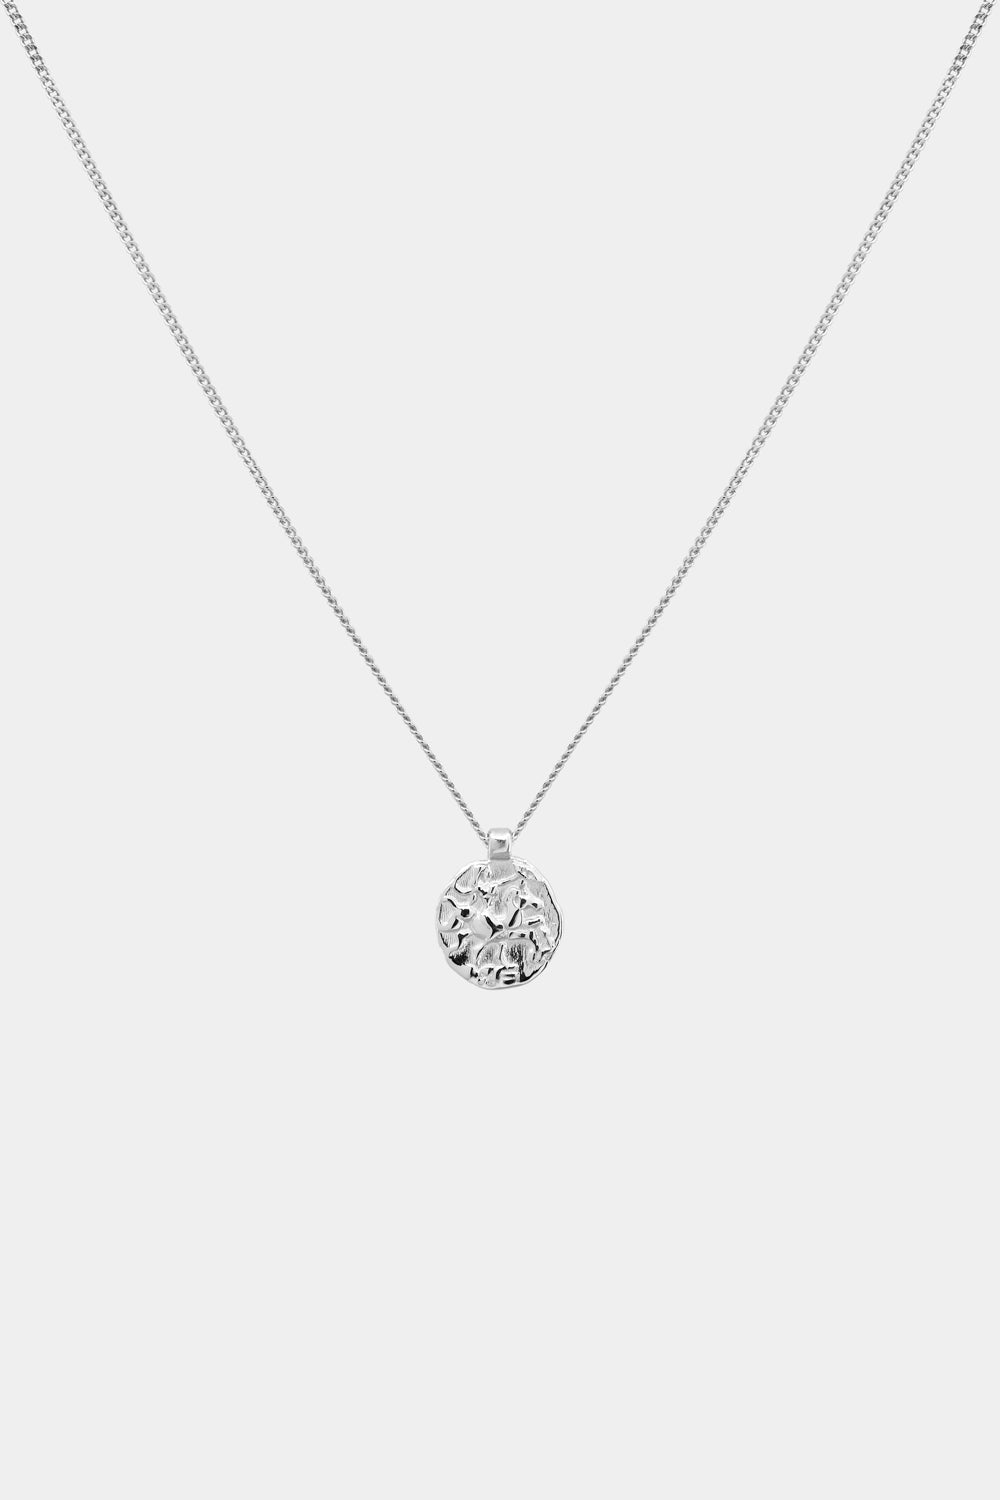 Mini Coin Necklace | Silver or 9K White Gold, More Options Available| Natasha Schweitzer